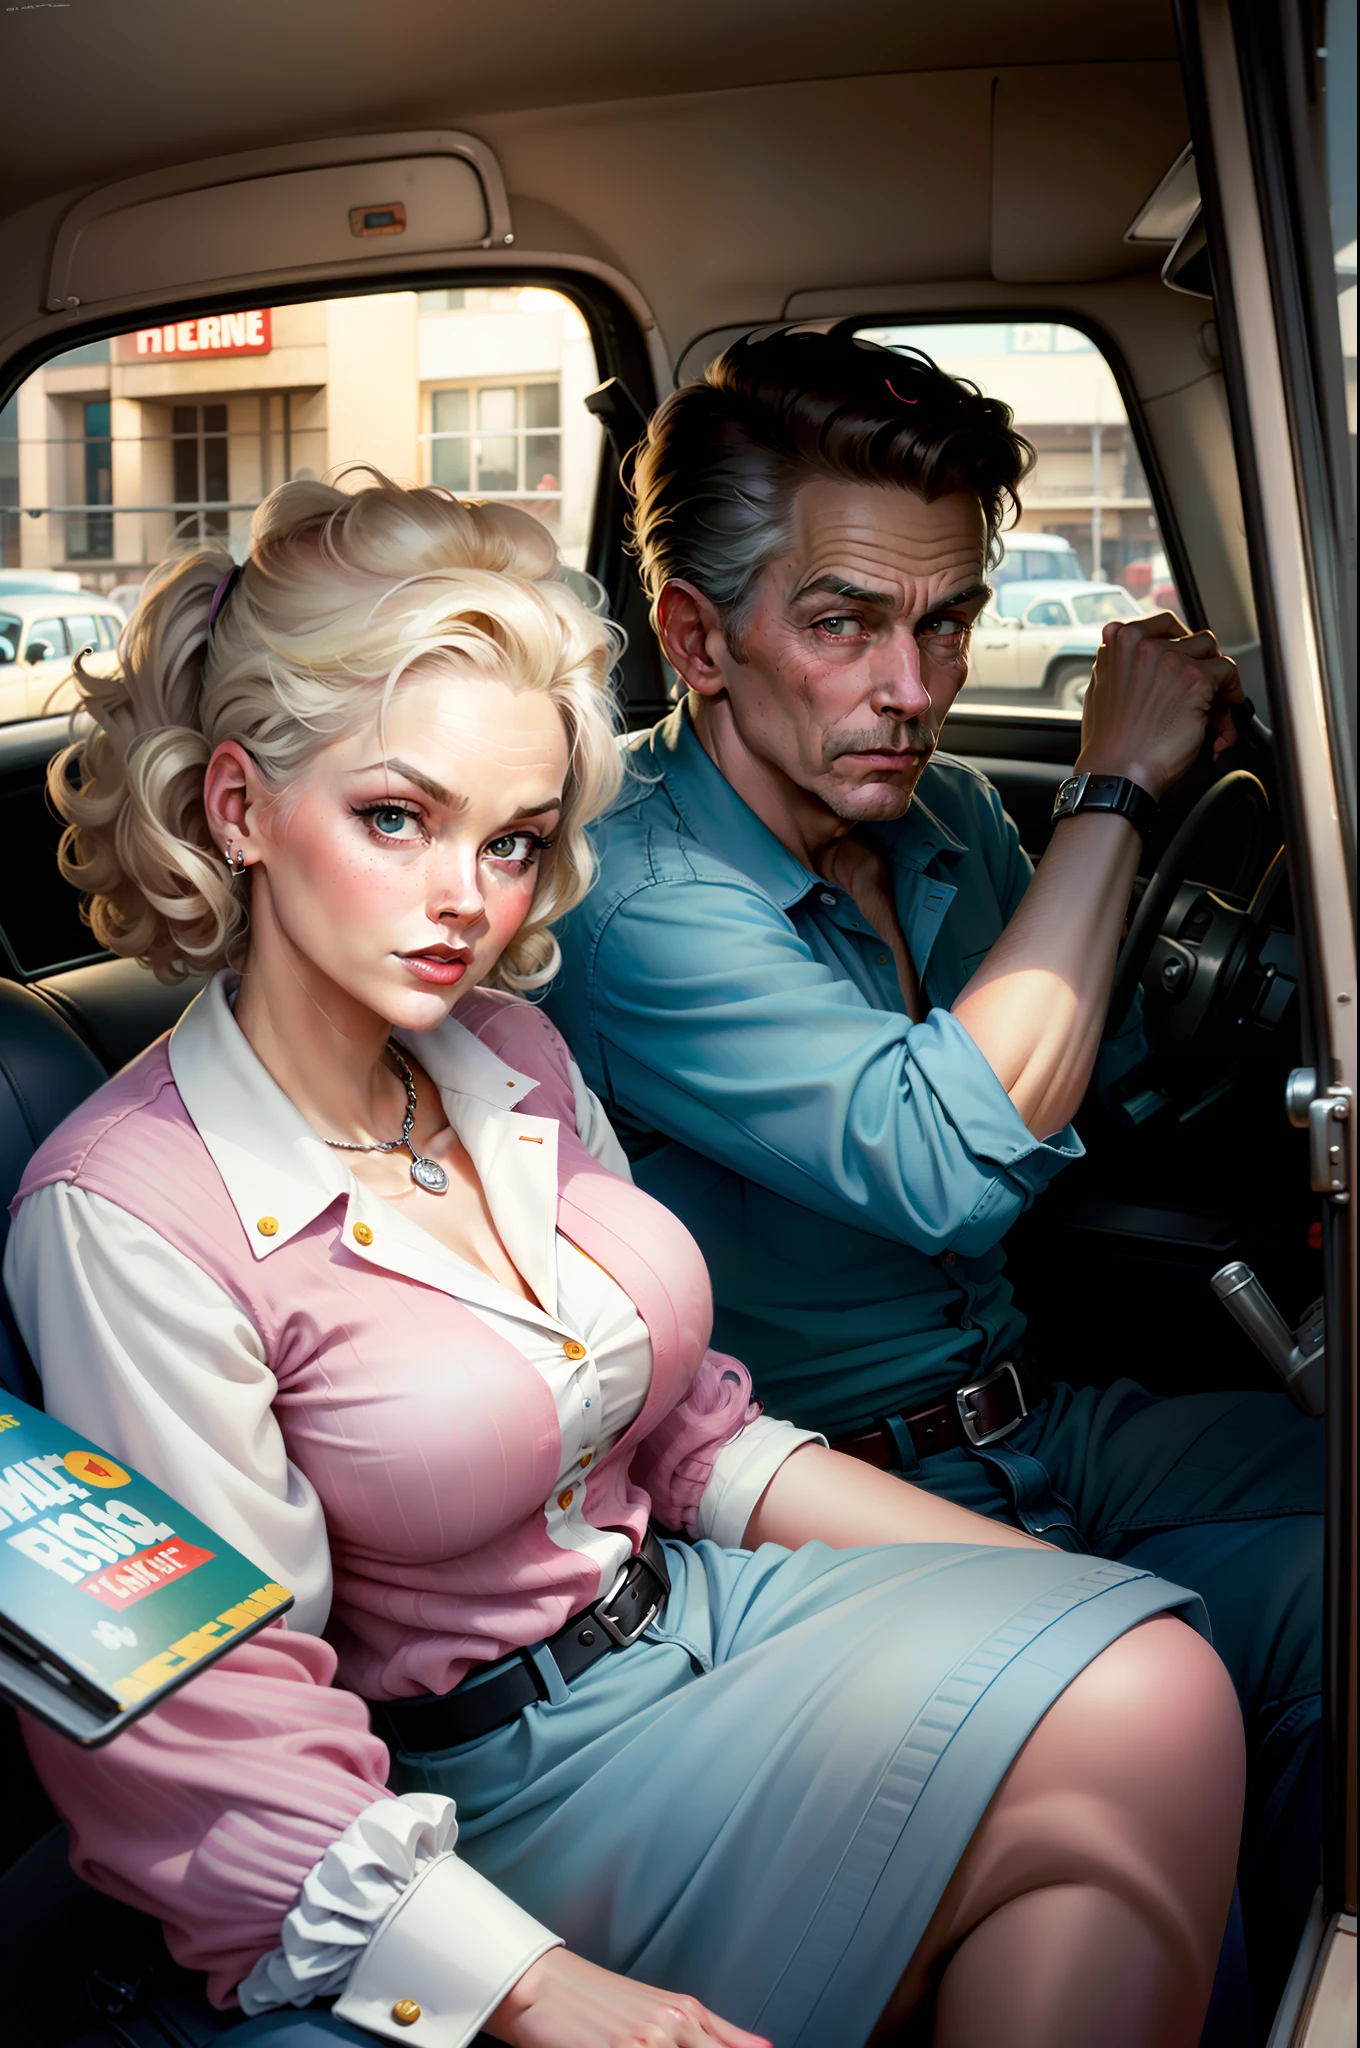 there is a man and woman sitting in a car with a dog, colorized background, colourized, colorized photo, by Art Fitzpatrick, colorized, inspired by Austin Briggs, ( art fitzpatrick ), digitally colored, norman rockwell style, inspired by Henry Justice Ford, in style of norman rockwell, inspired by John French Sloan, full color illustration, a colorized photo